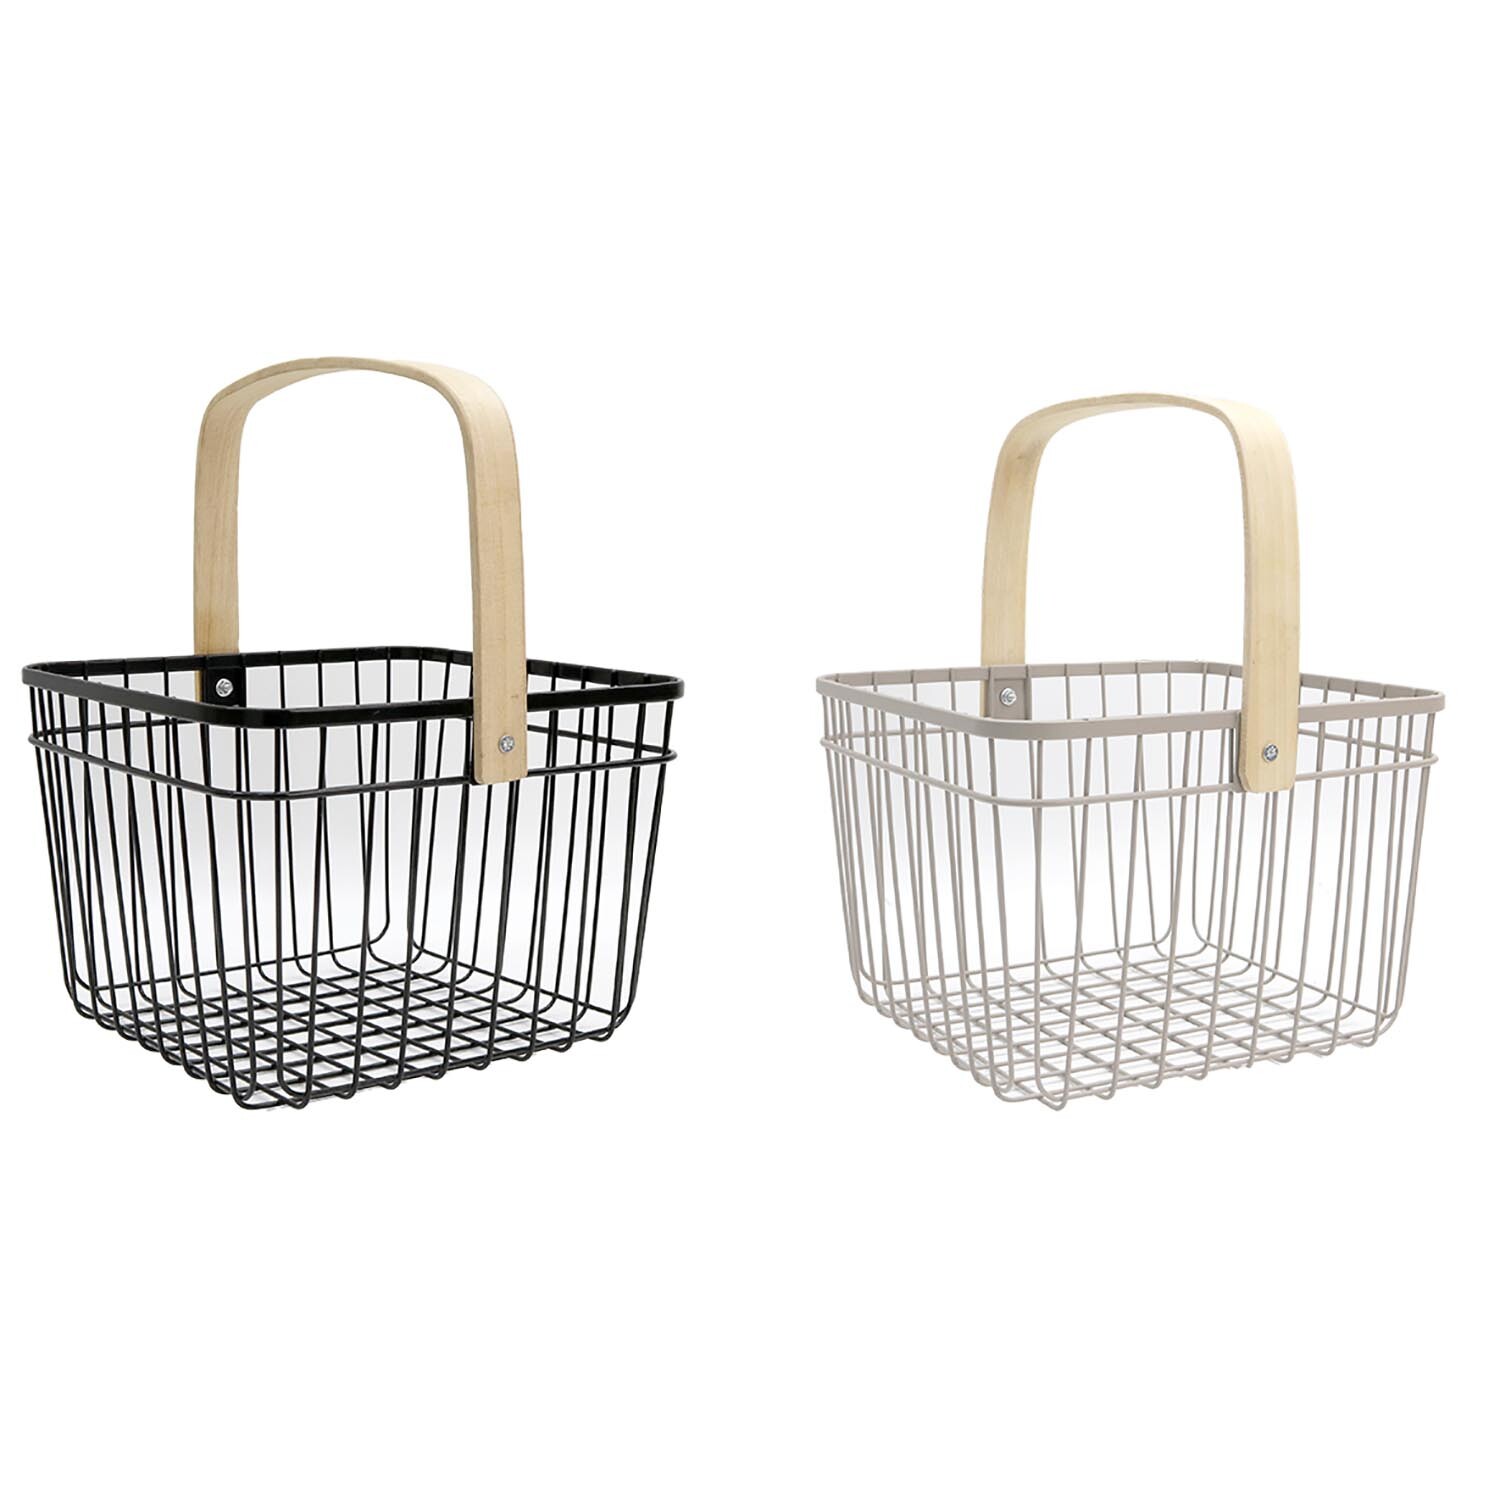 Single Malmo Mesh Storage Basket with Wooden Handle in Assorted styles Image